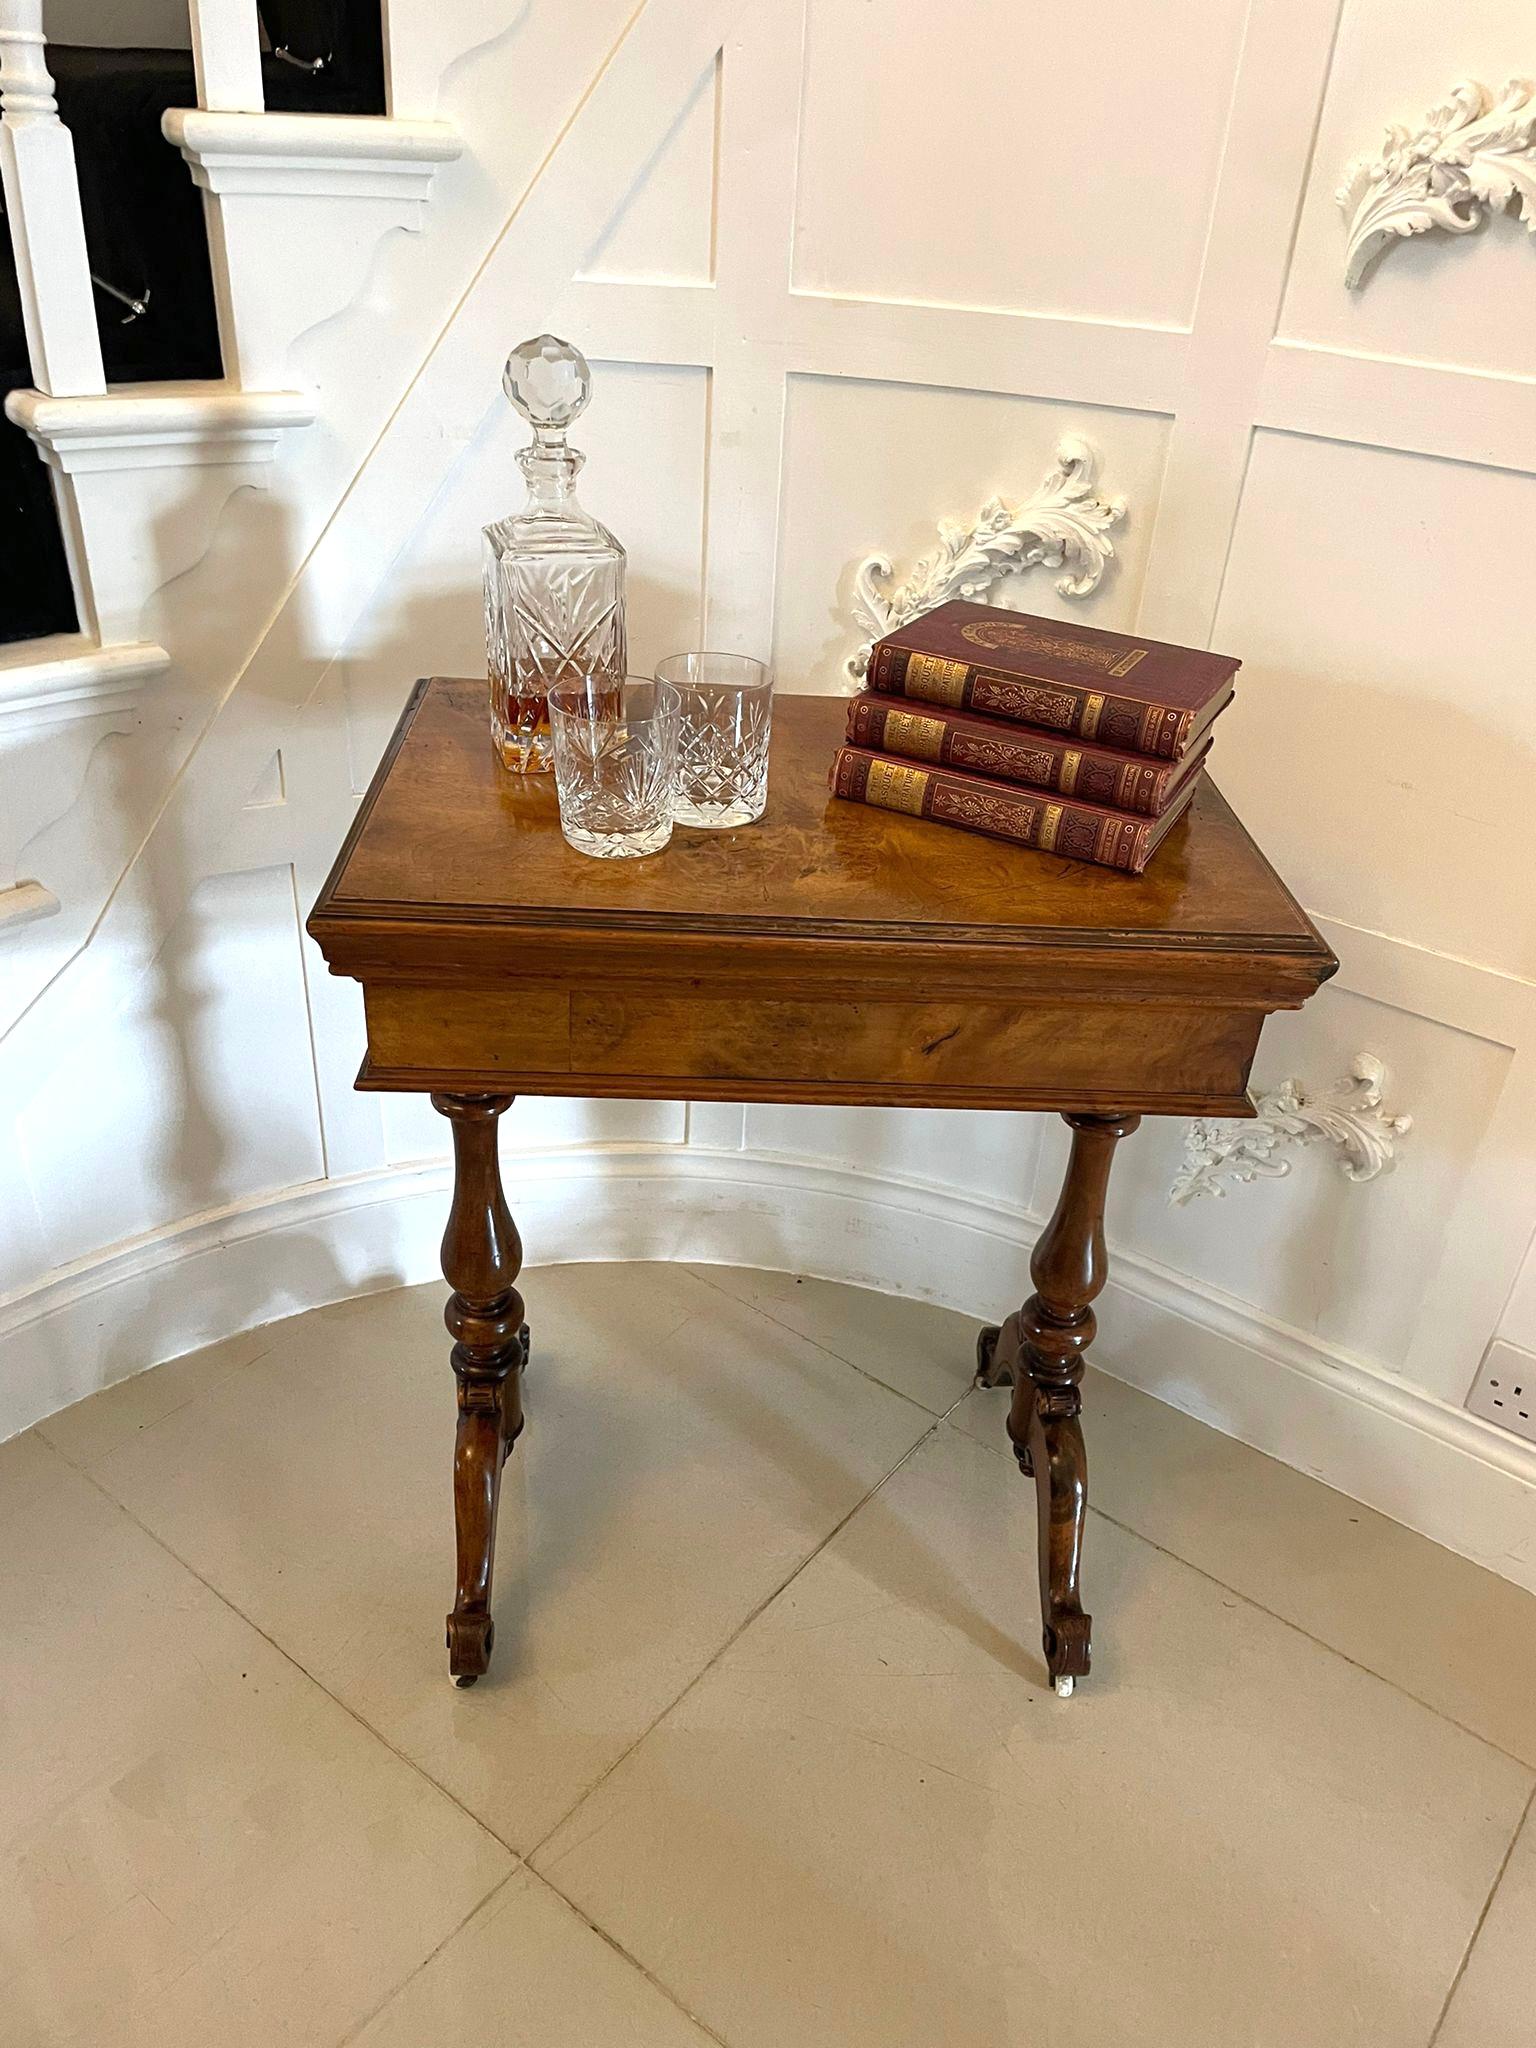 Unusual Antique Victorian quality burr walnut jardinière table having a quality burr walnut lift off top with a moulded edge opening to the original liner, burr walnut frieze supported on turned walnut columns standing on shaped cabriole legs with